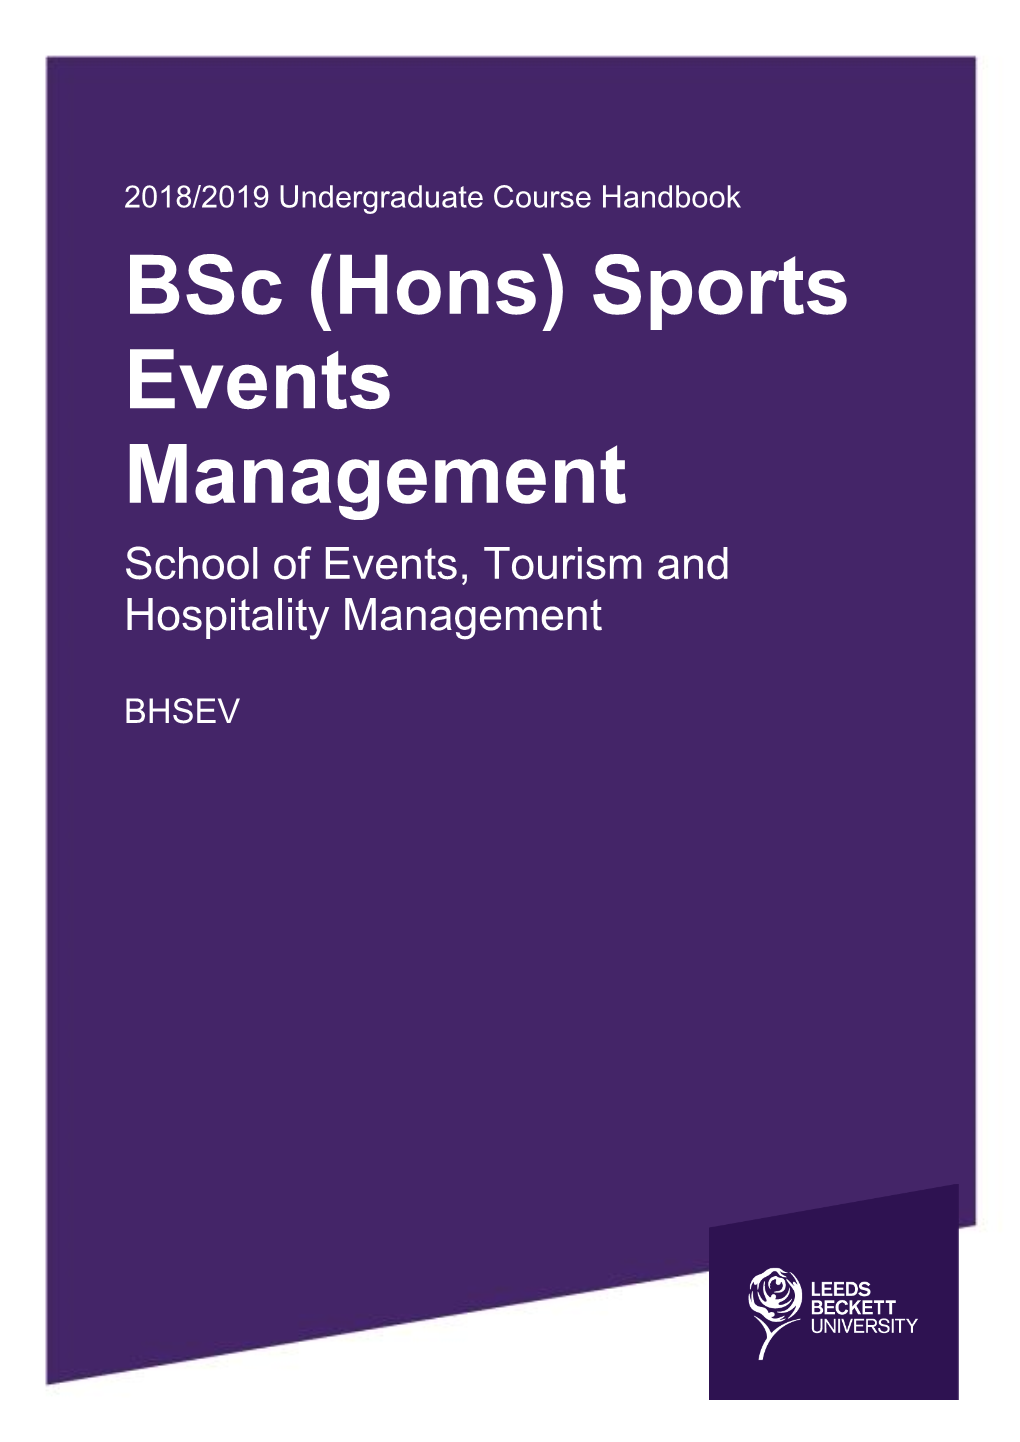 Bsc (Hons) Sports Events Management School of Events, Tourism and Hospitality Management